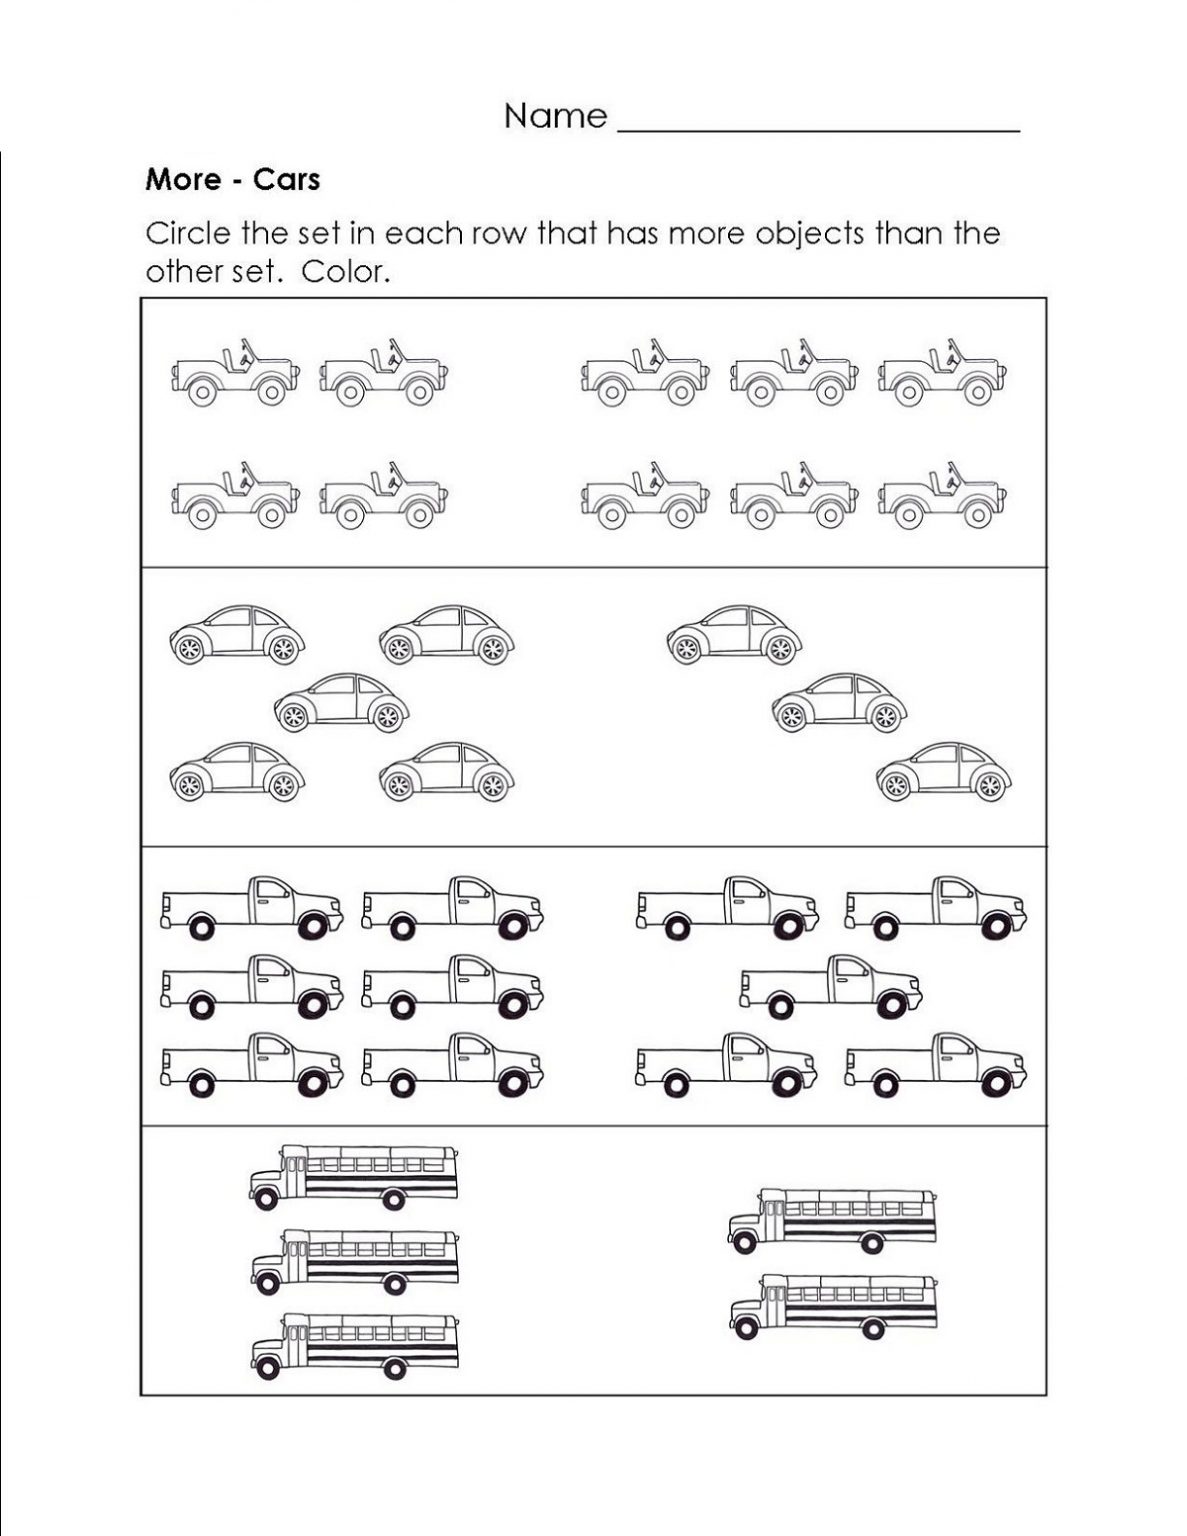 more-or-less-worksheets-printable-101-activity